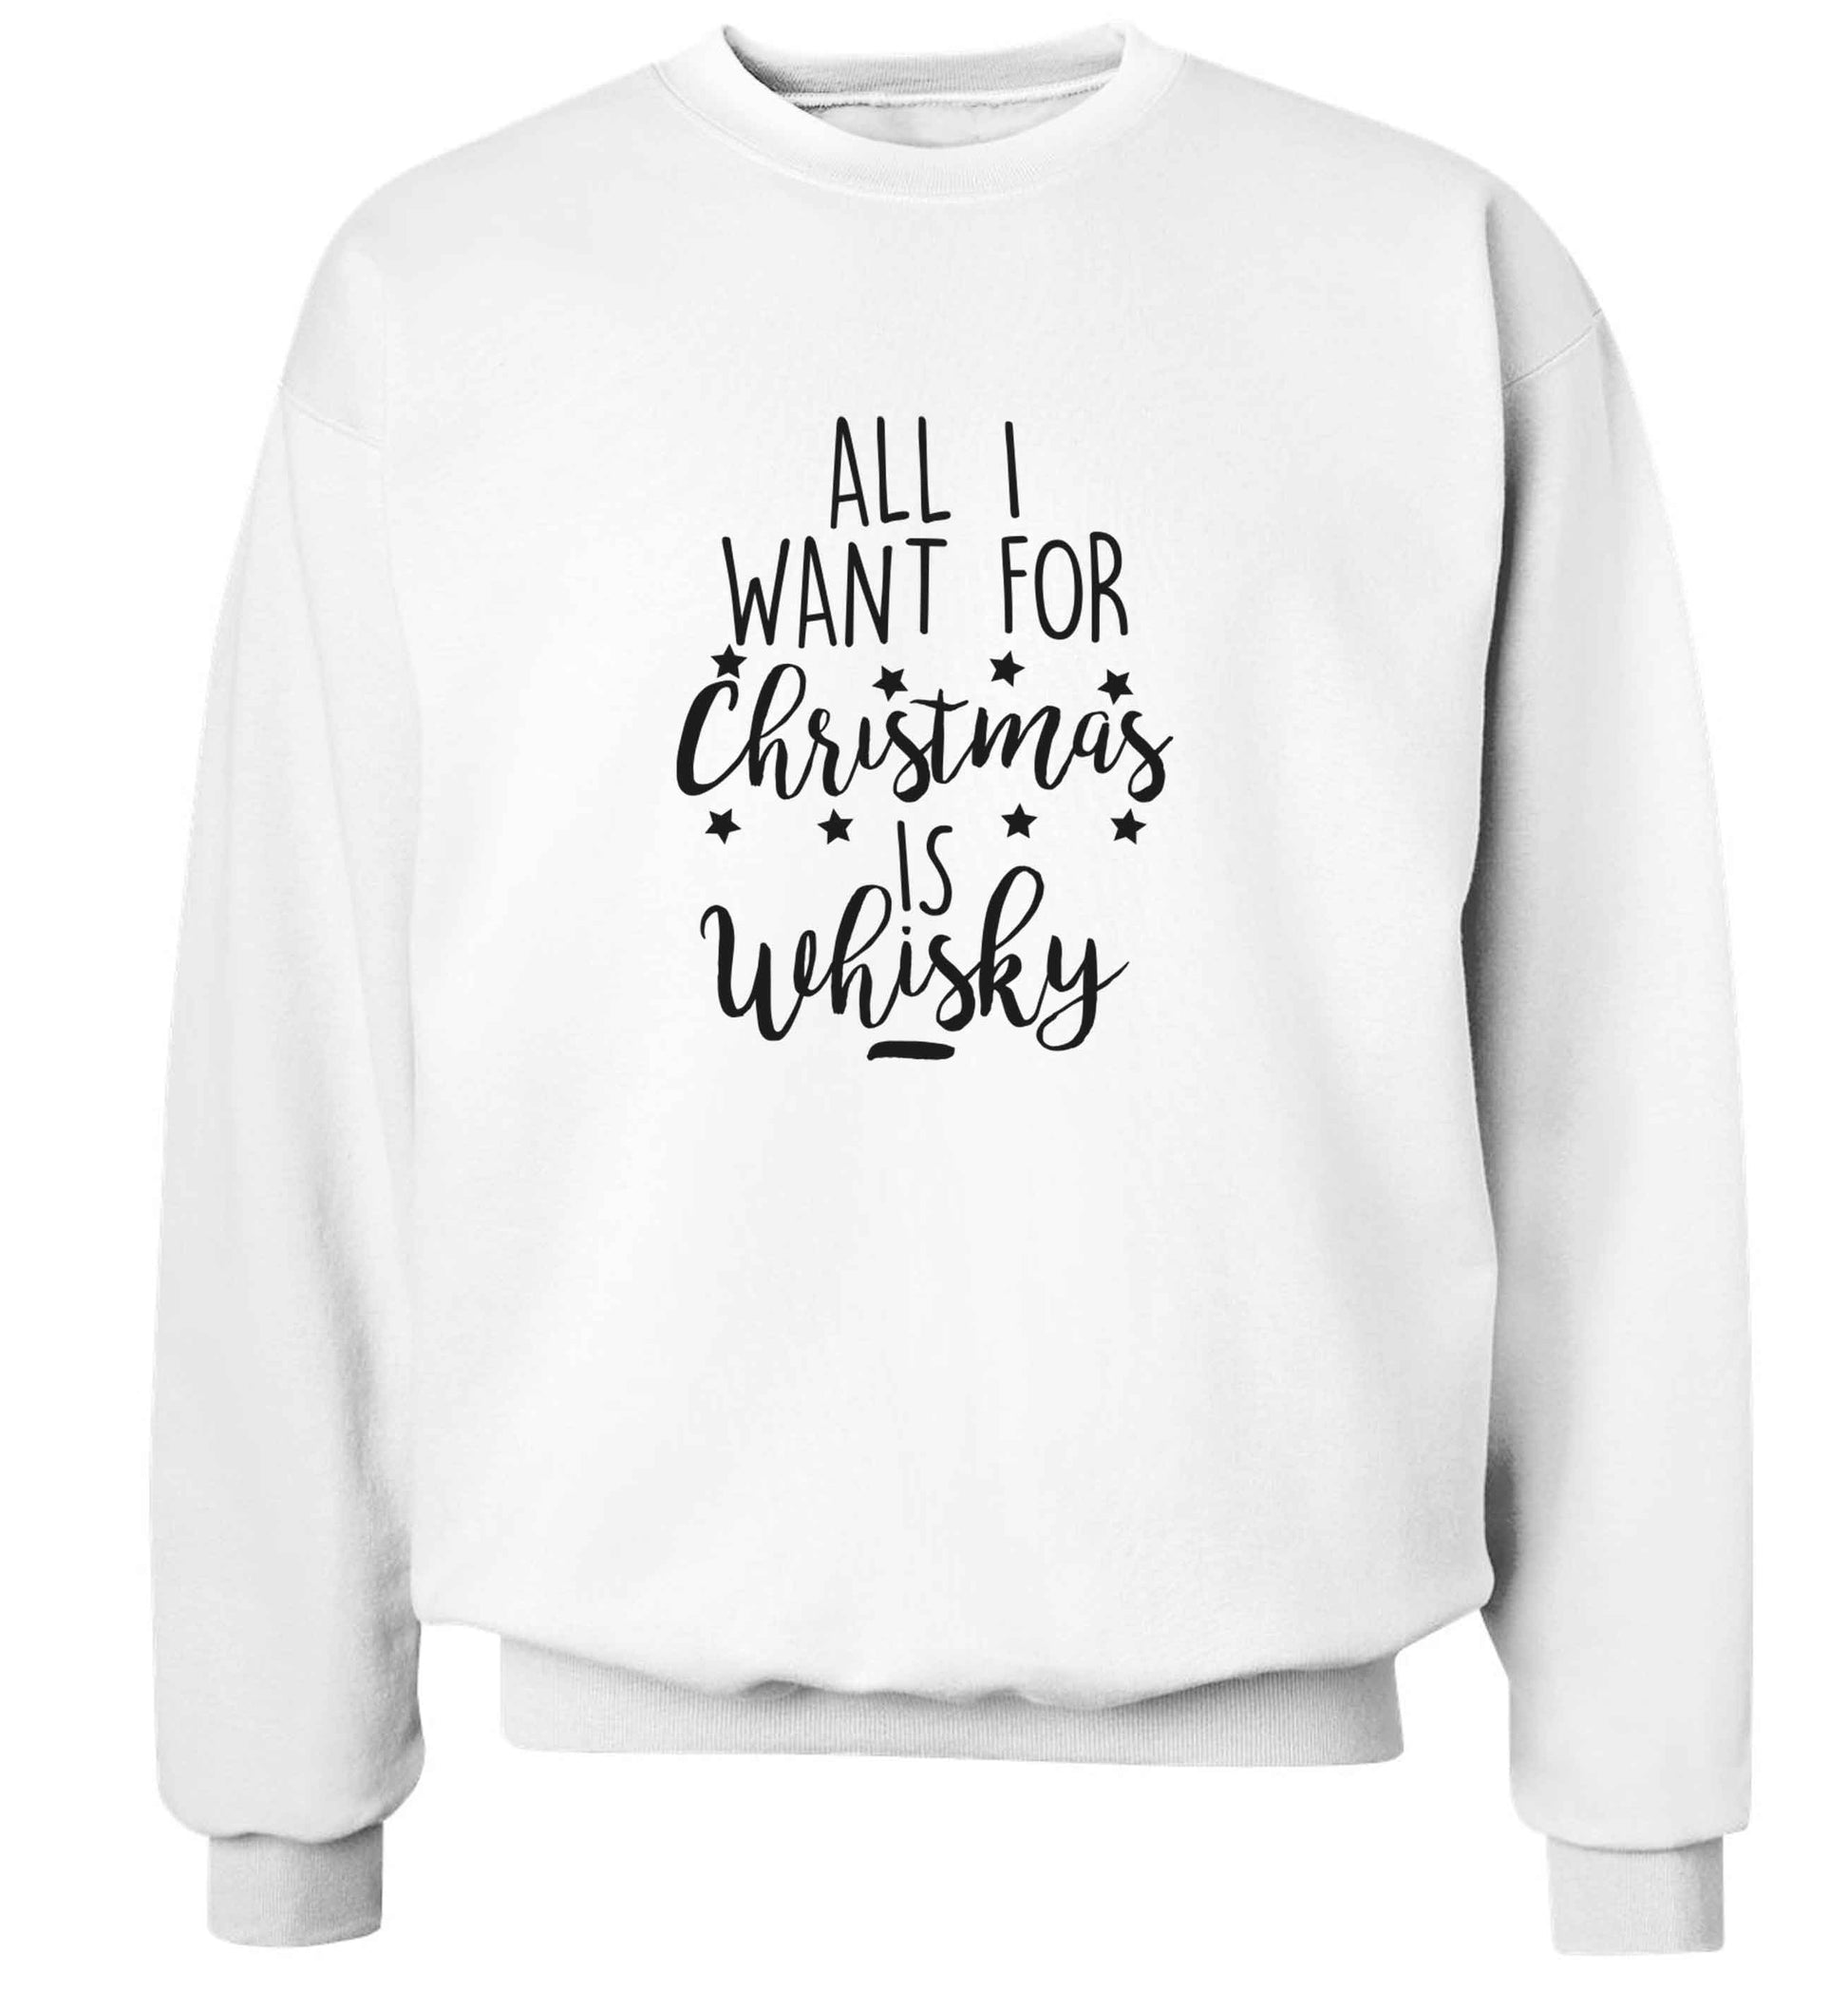 All I want for Christmas is whisky adult's unisex white sweater 2XL